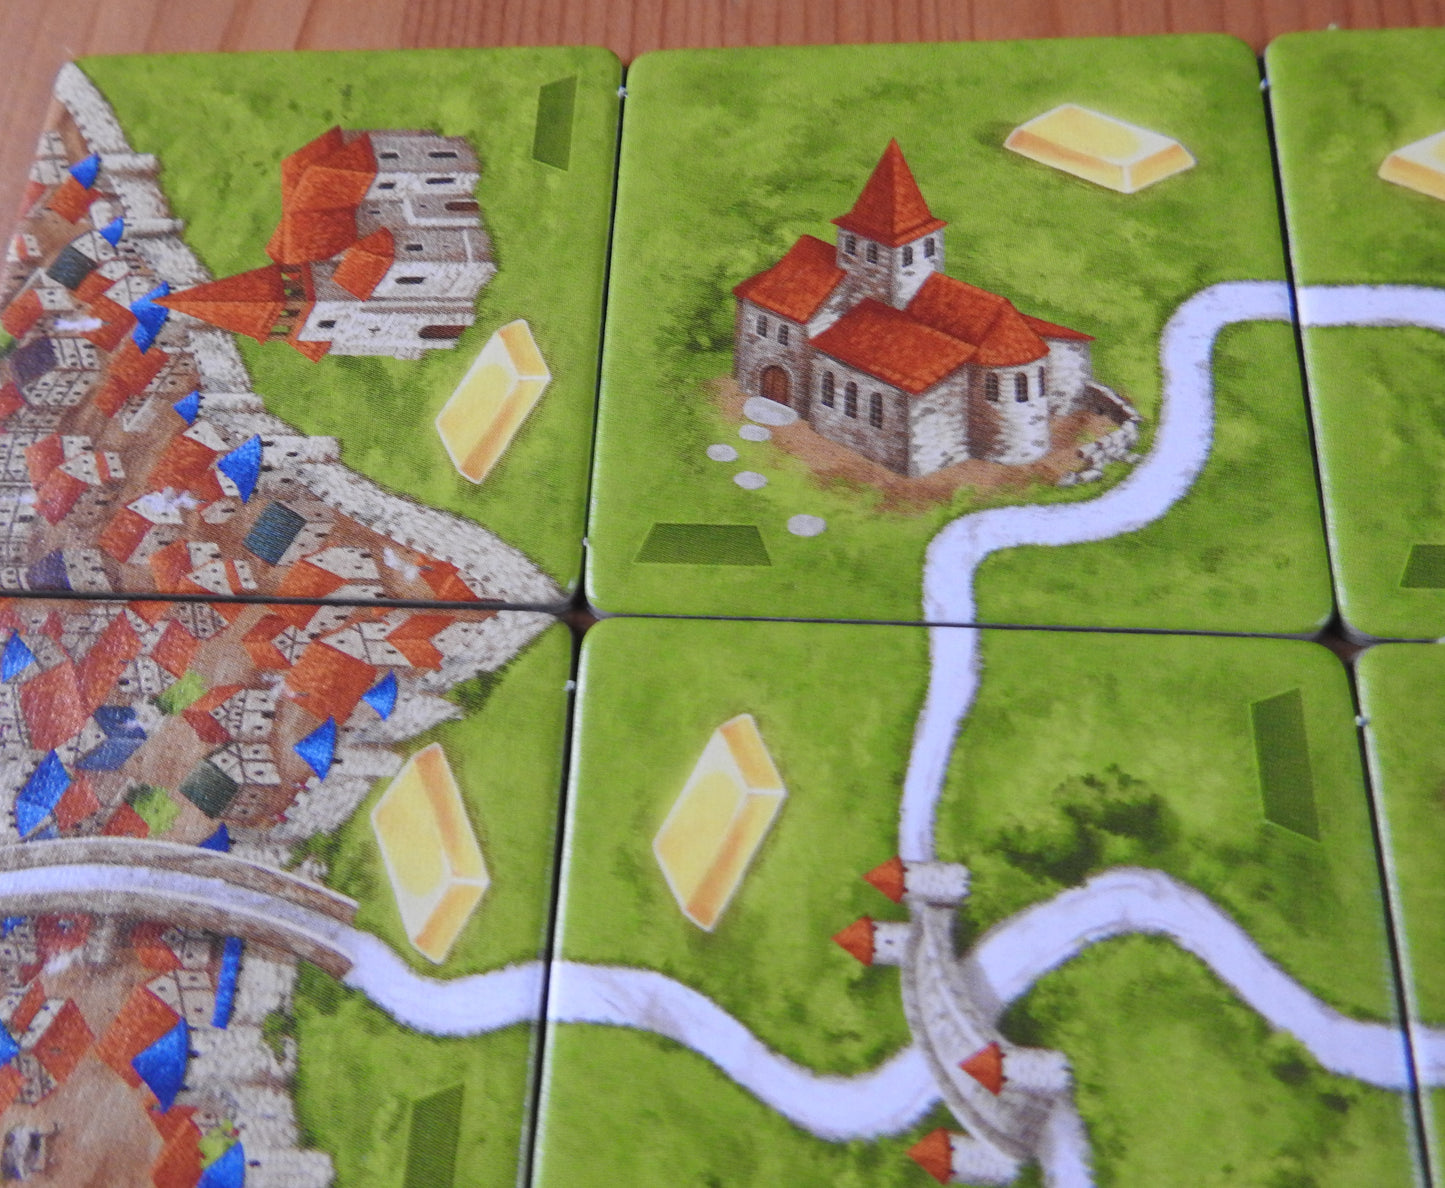 A close-up of some of the tiles for this Carcassonne Gold Mines expansion.